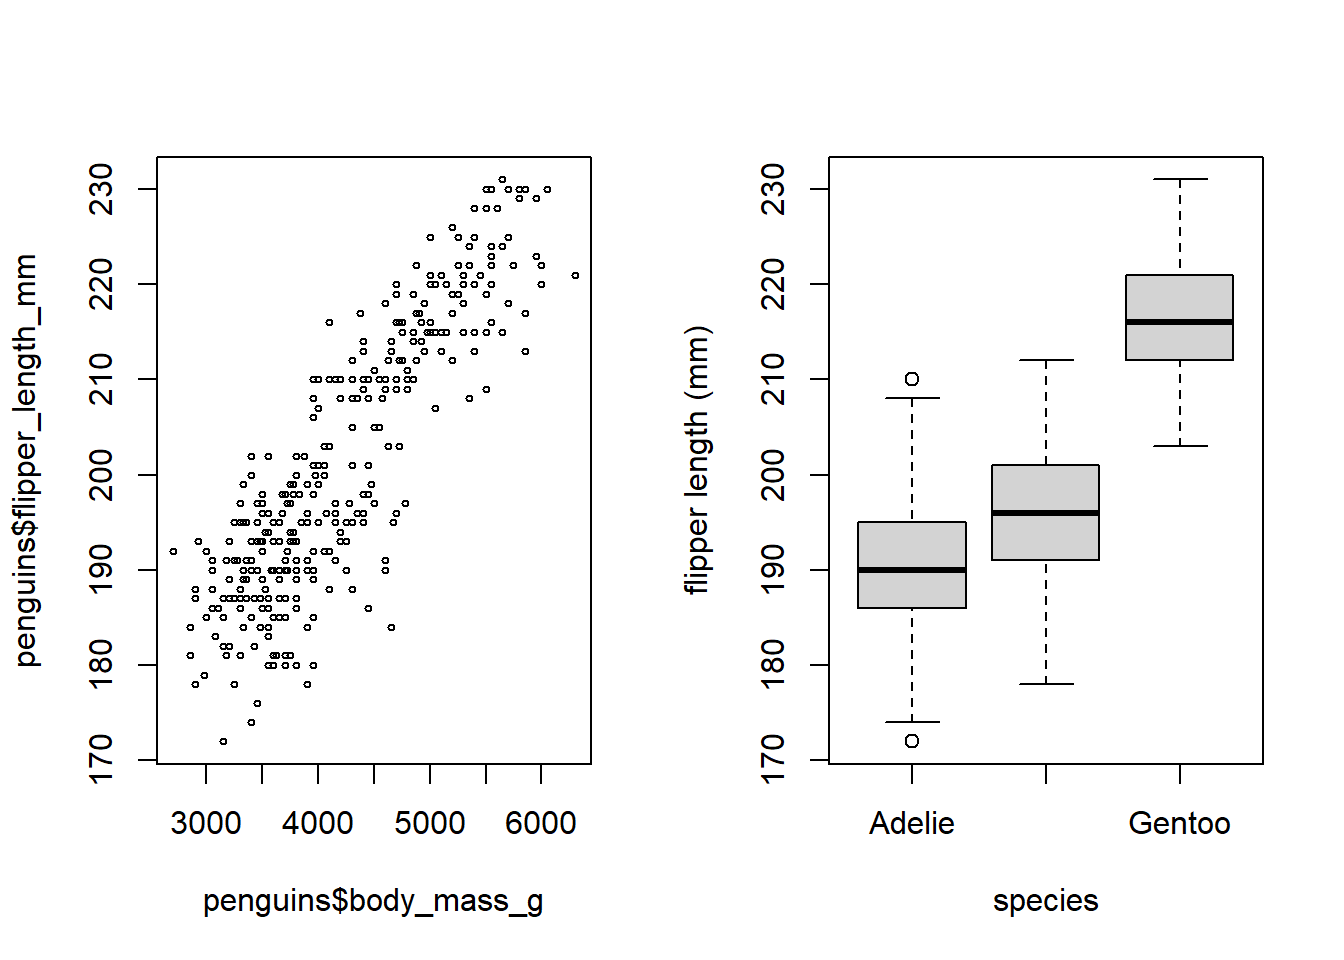 Flipper length by mass and by species, base plot system. The Antarctic peninsula penguin data set is from @palmer.